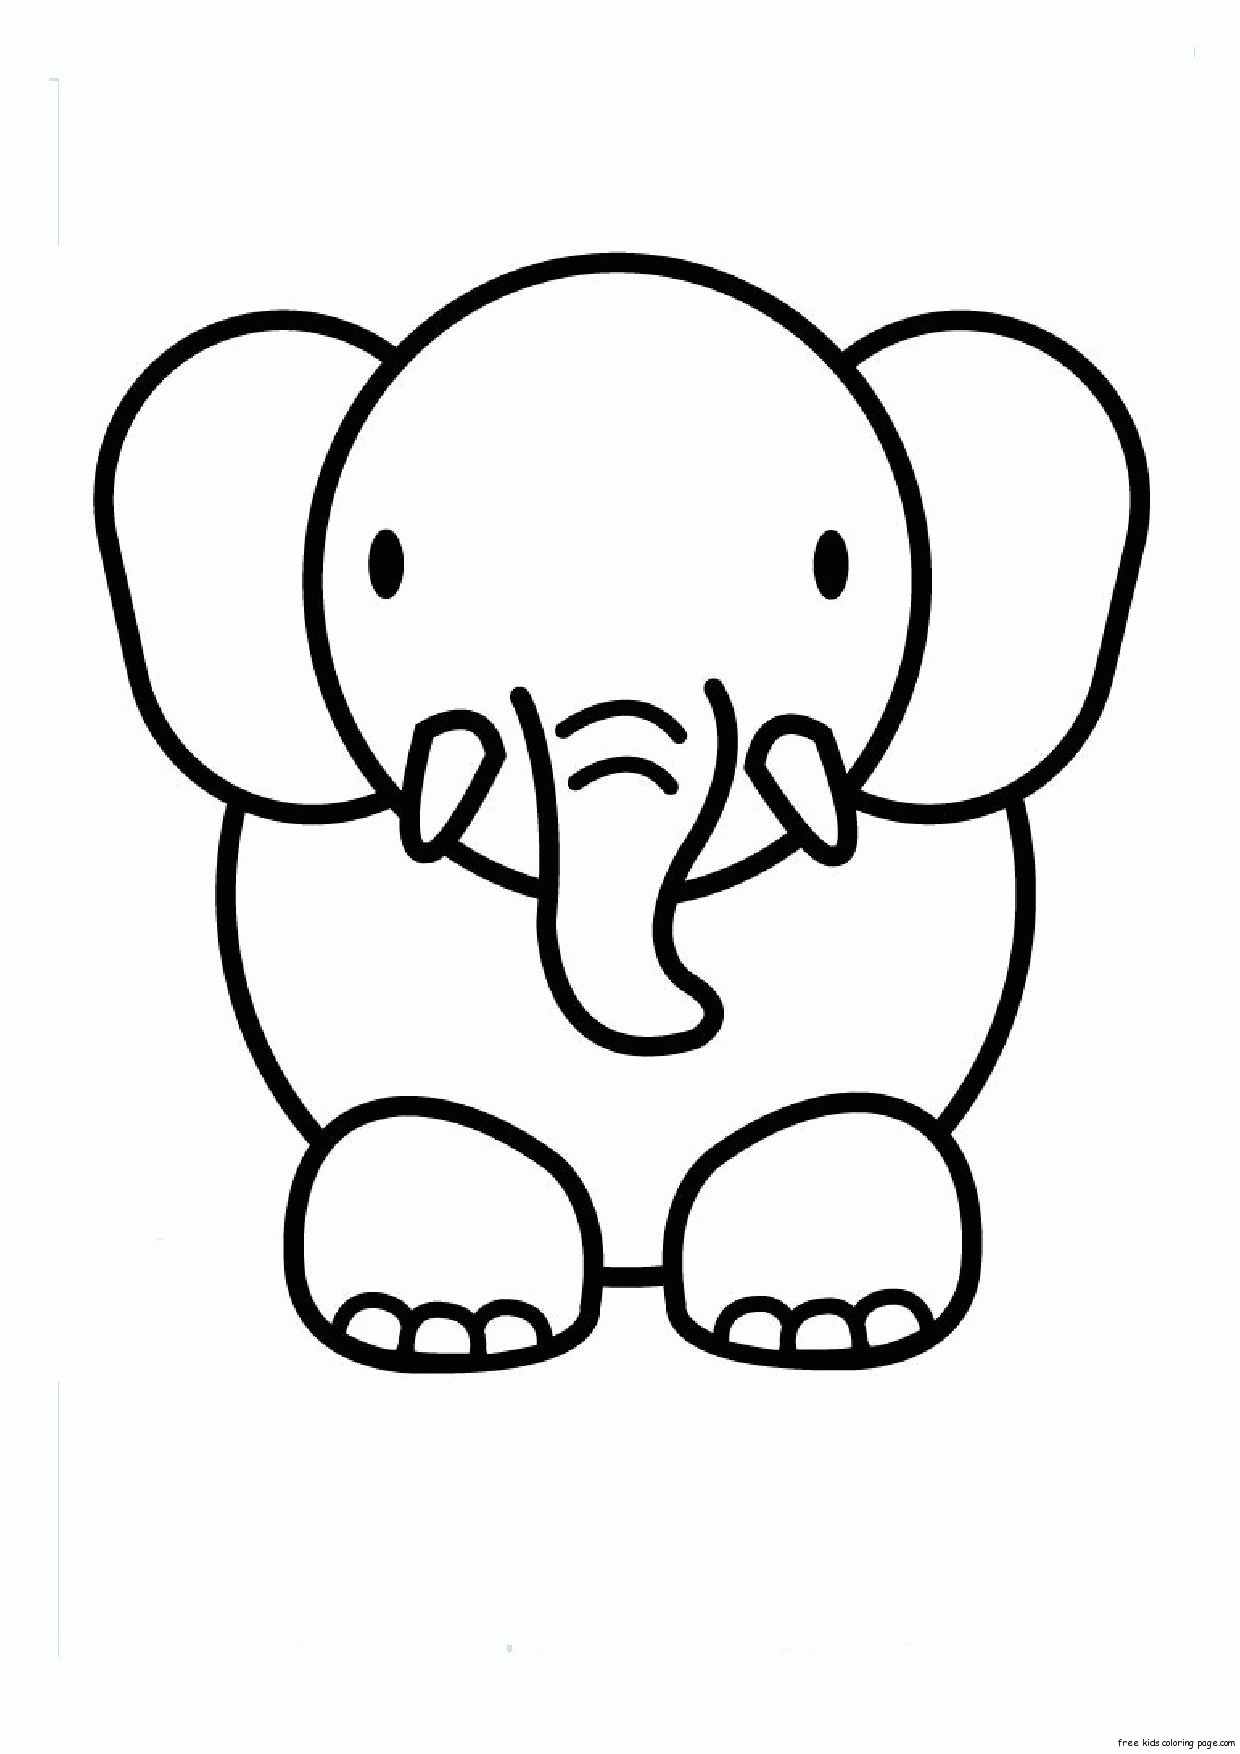 Cute Animals Coloring Pages - Widetheme